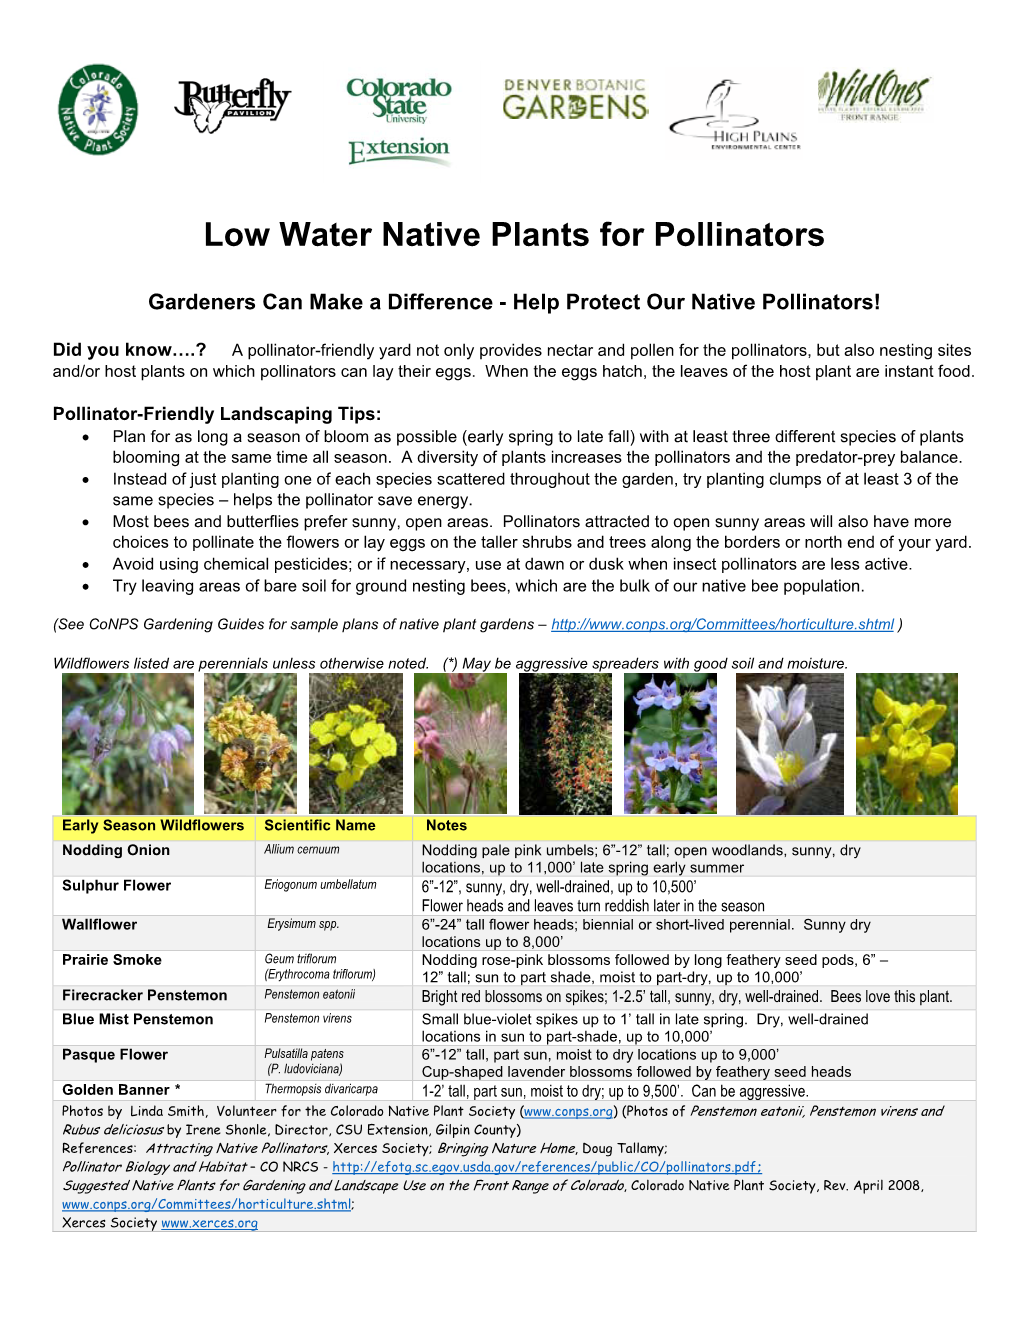 Low Water Native Plants for Pollinators